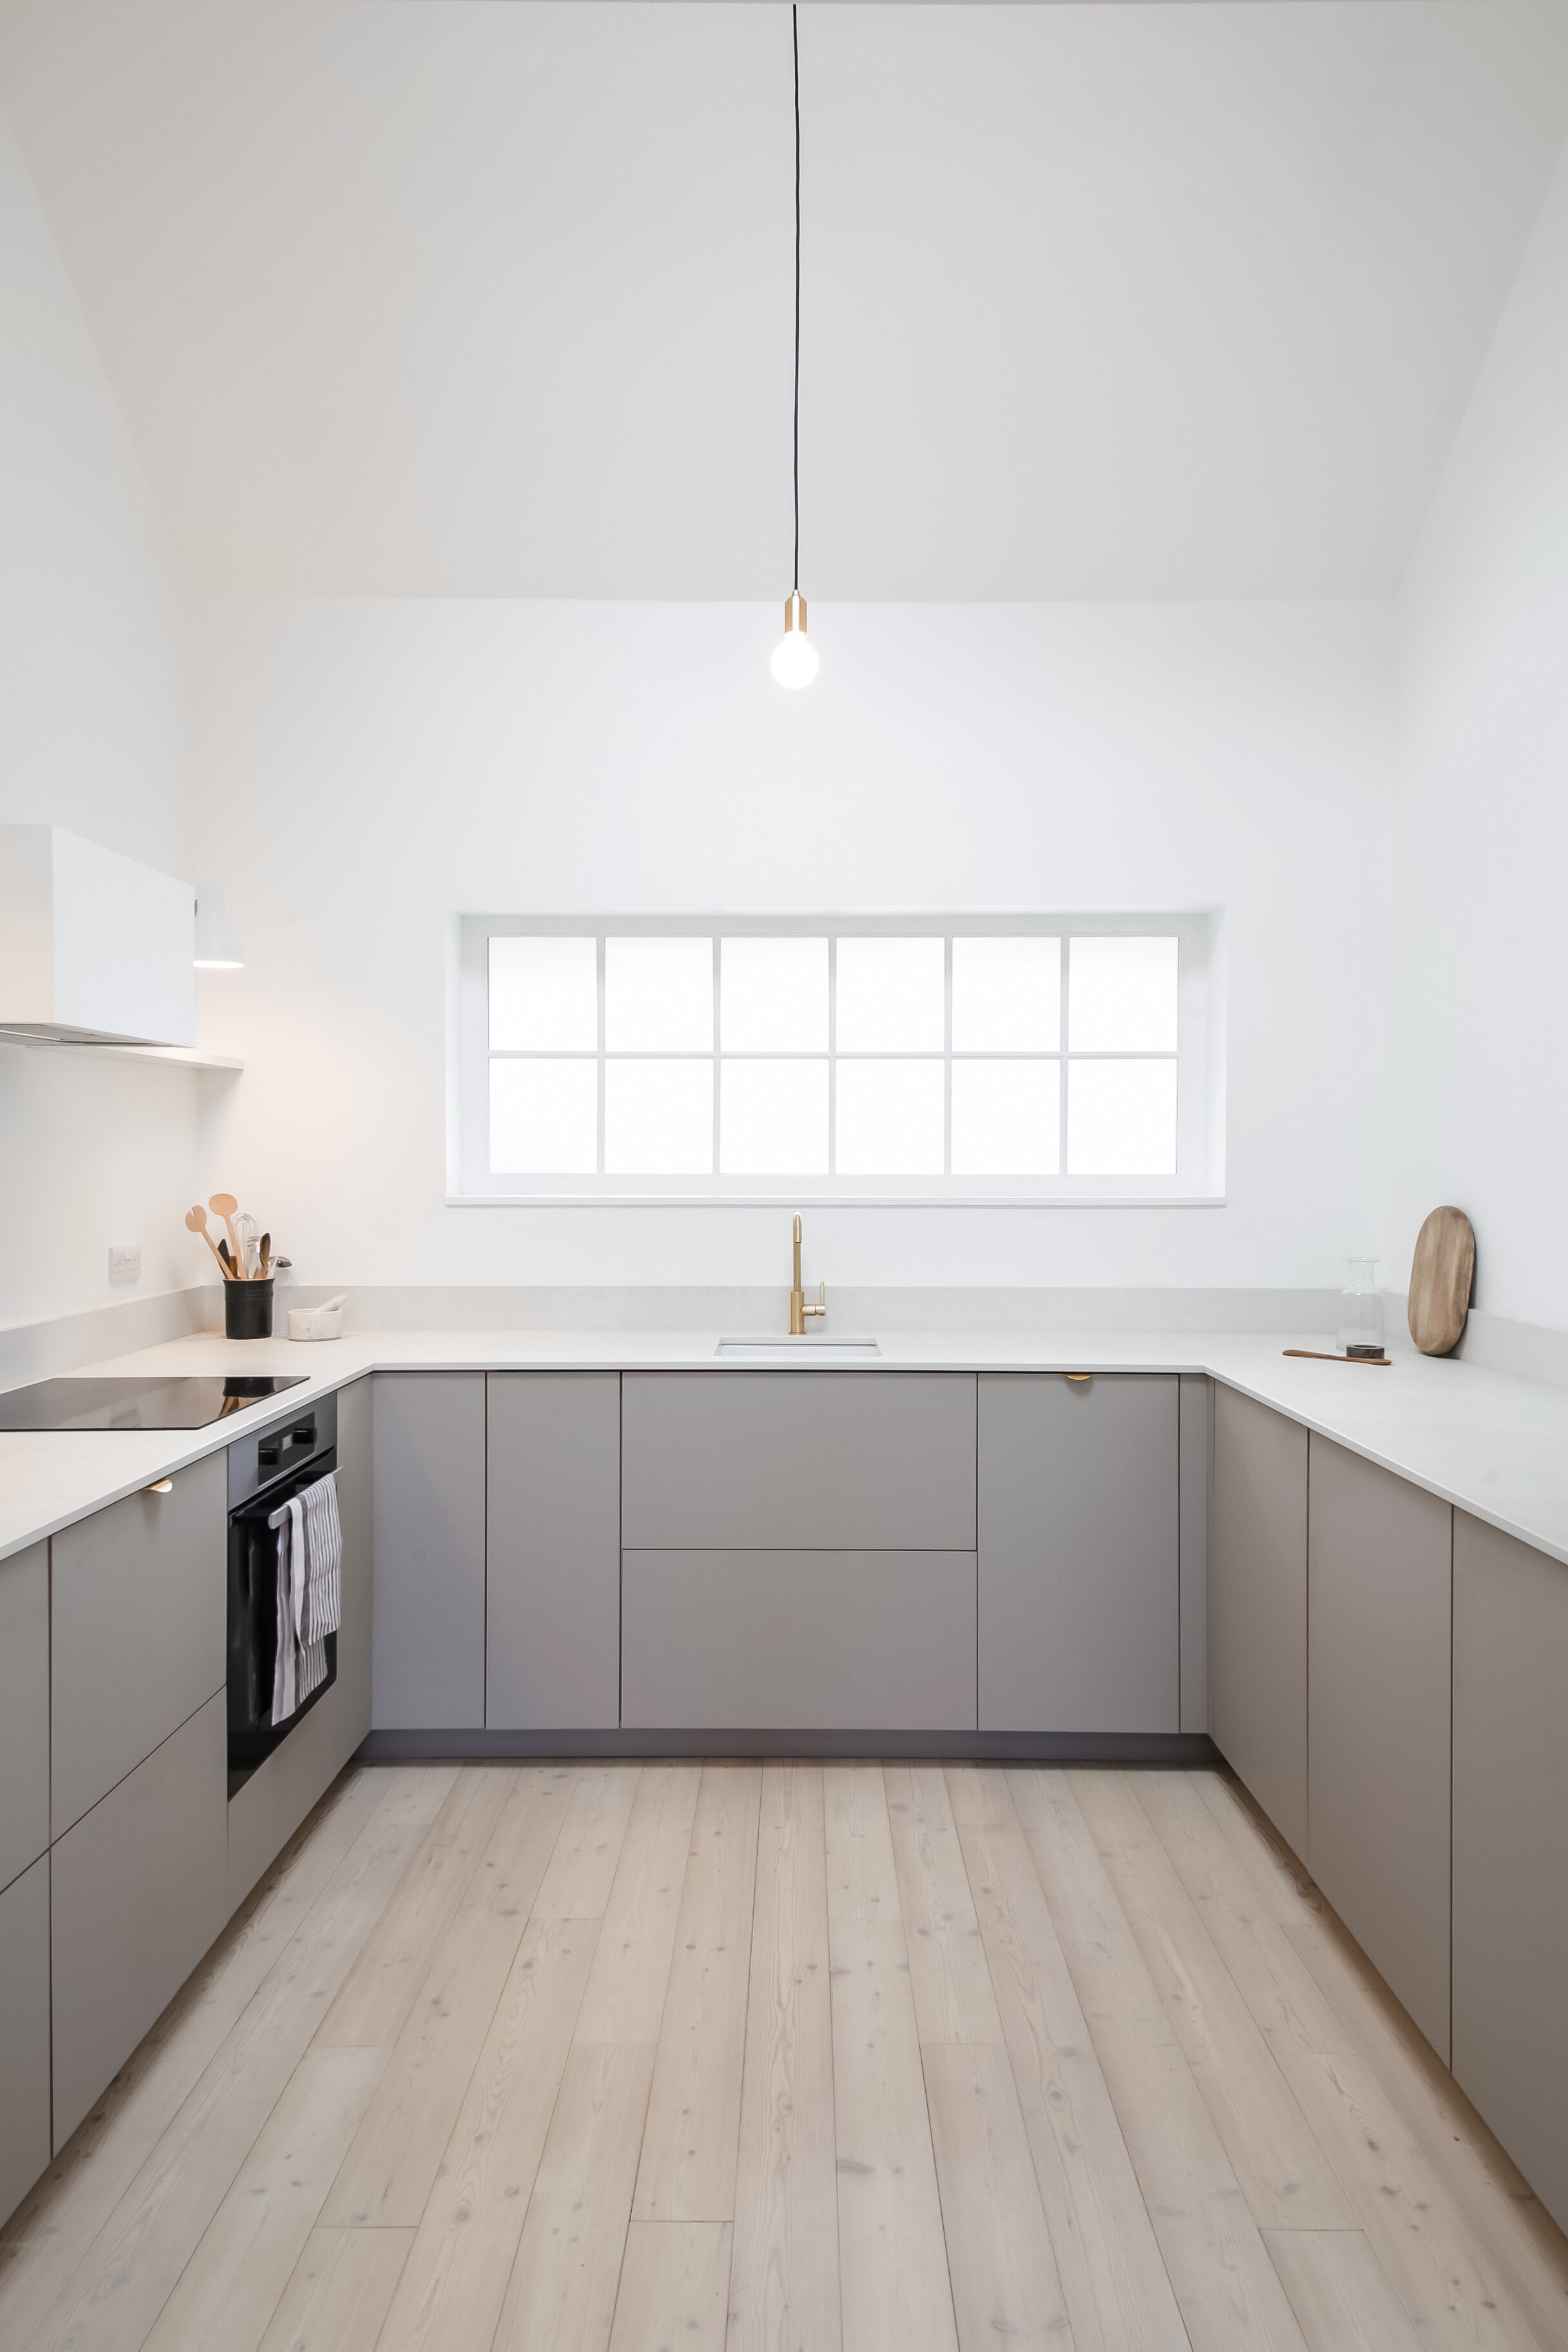 Our Contemporary Minimalist Kitchen Extension The Reveal